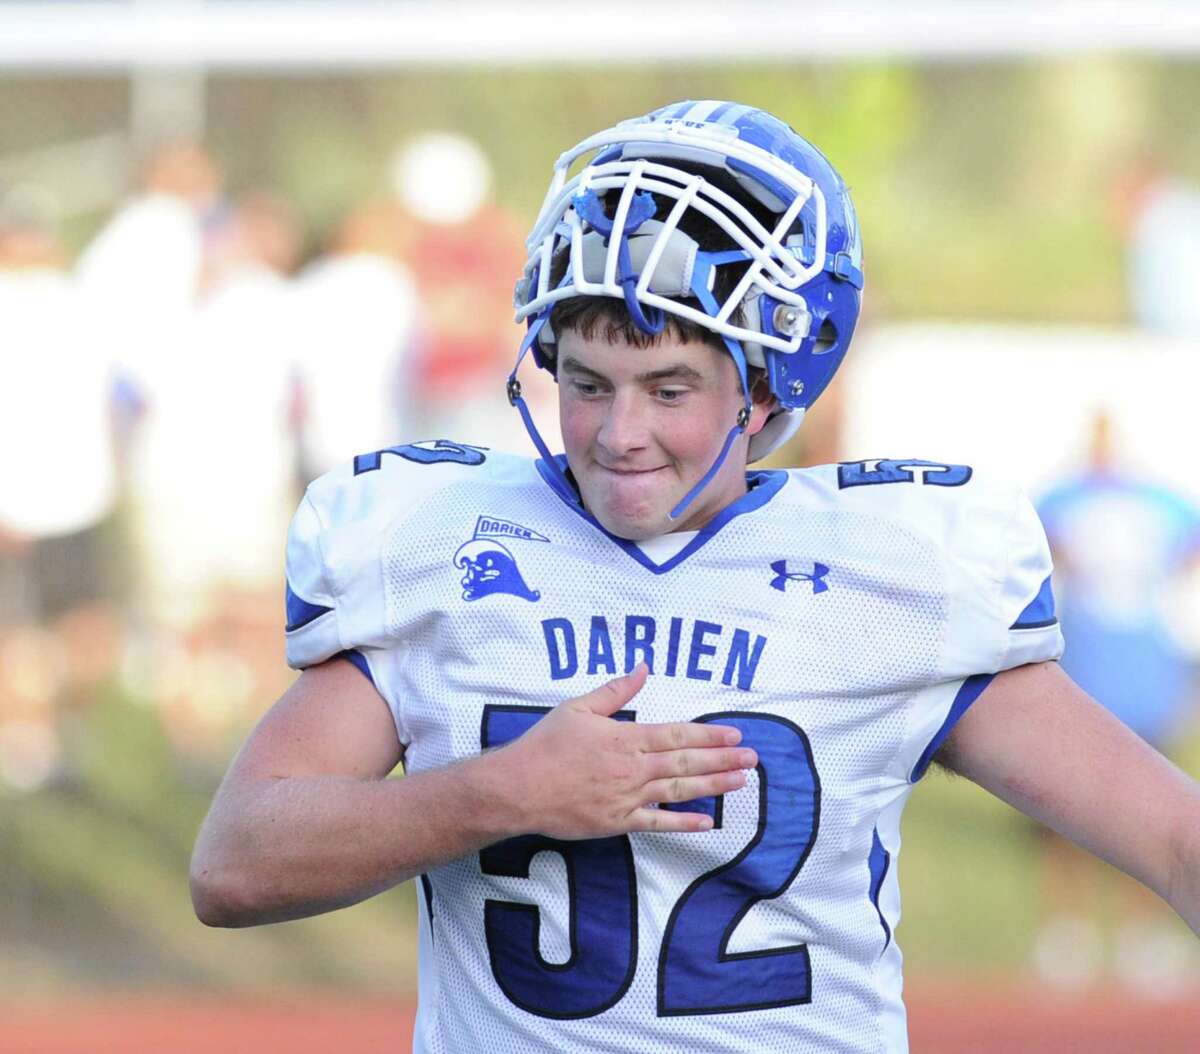 Darien’s Brian Keating during a game against Greenwich in September 2015.